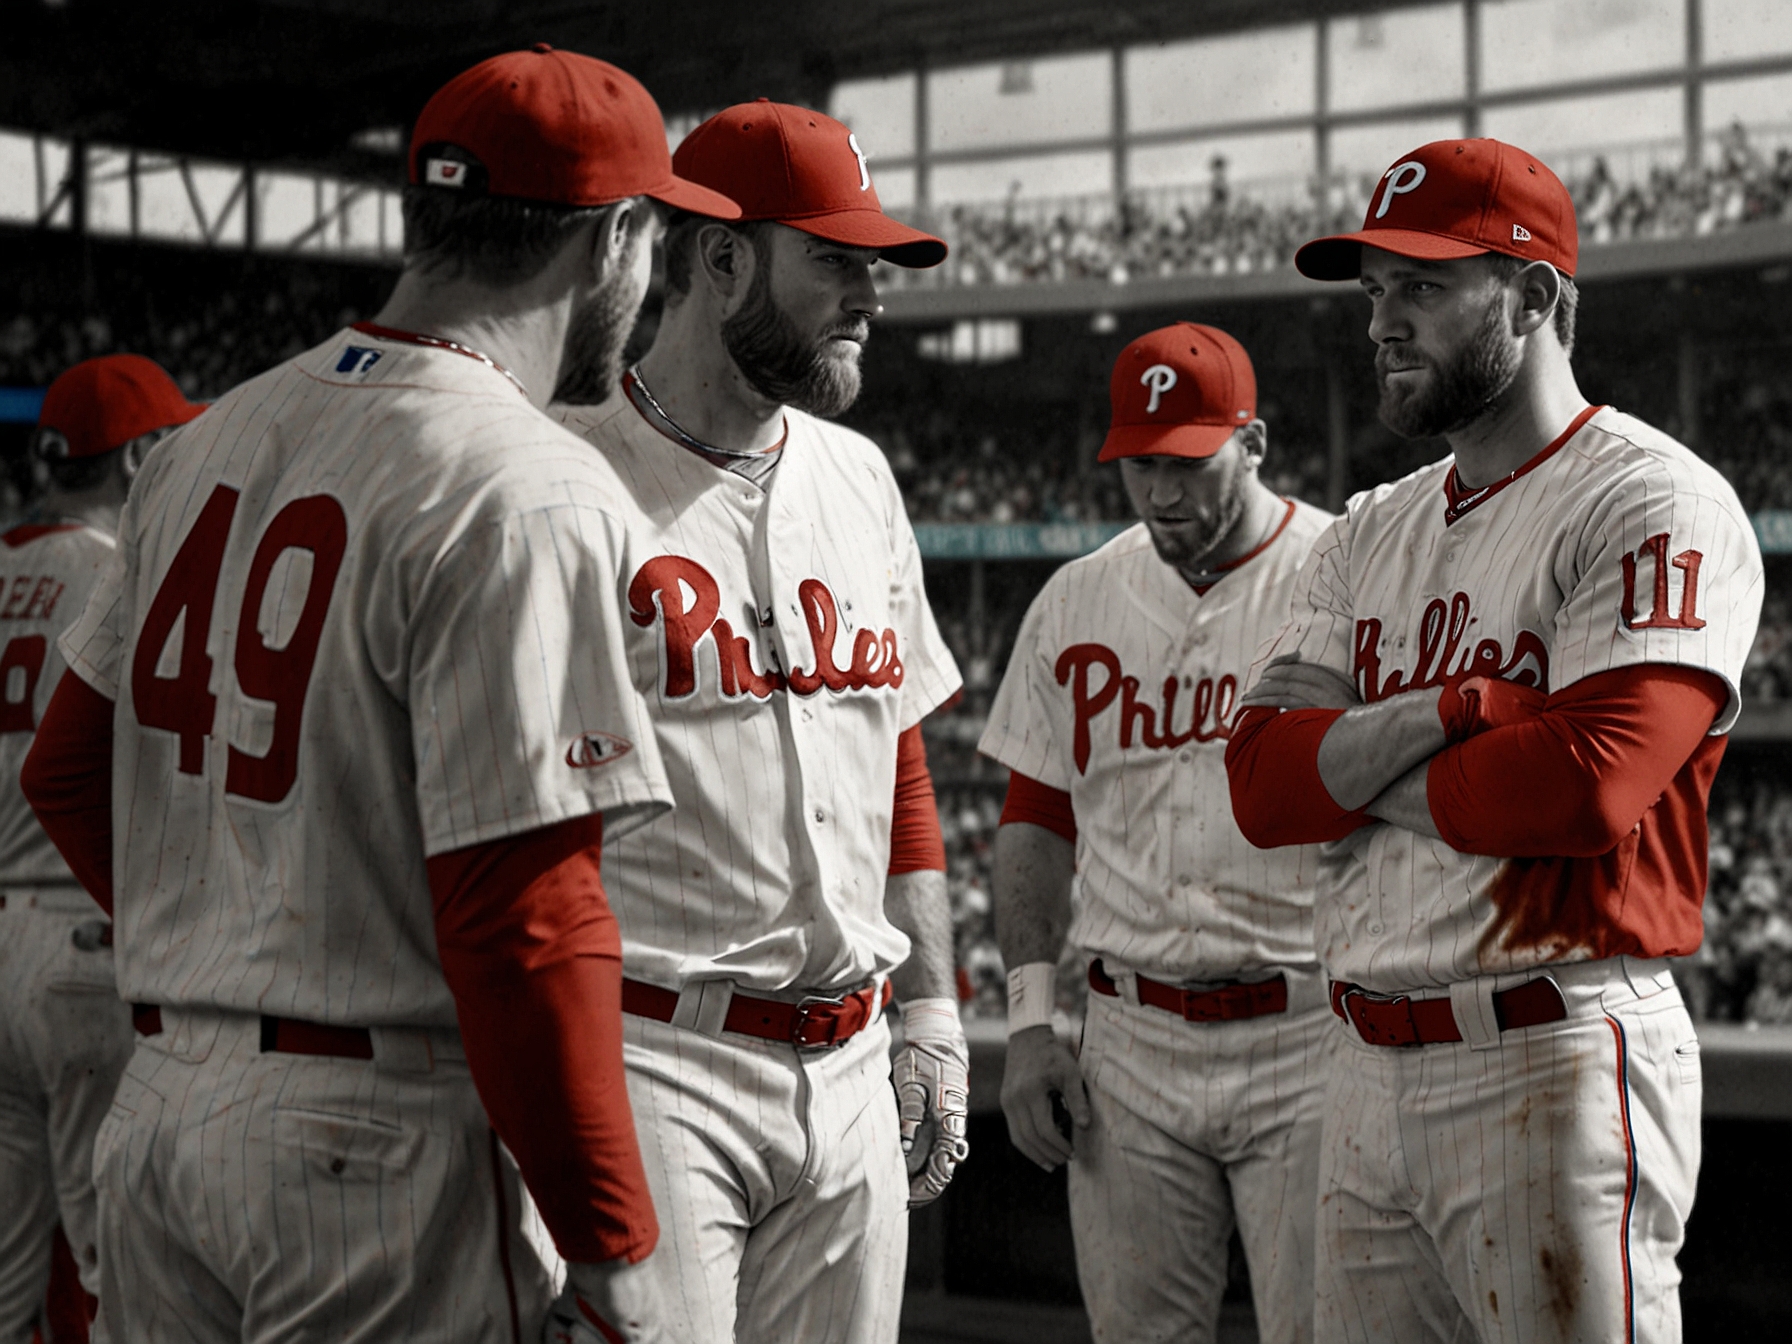 Philadelphia Phillies' teammates and coaching staff showing concern as Bryce Harper limps off the field, highlighting the emotional and physical toll of his injury on the team.